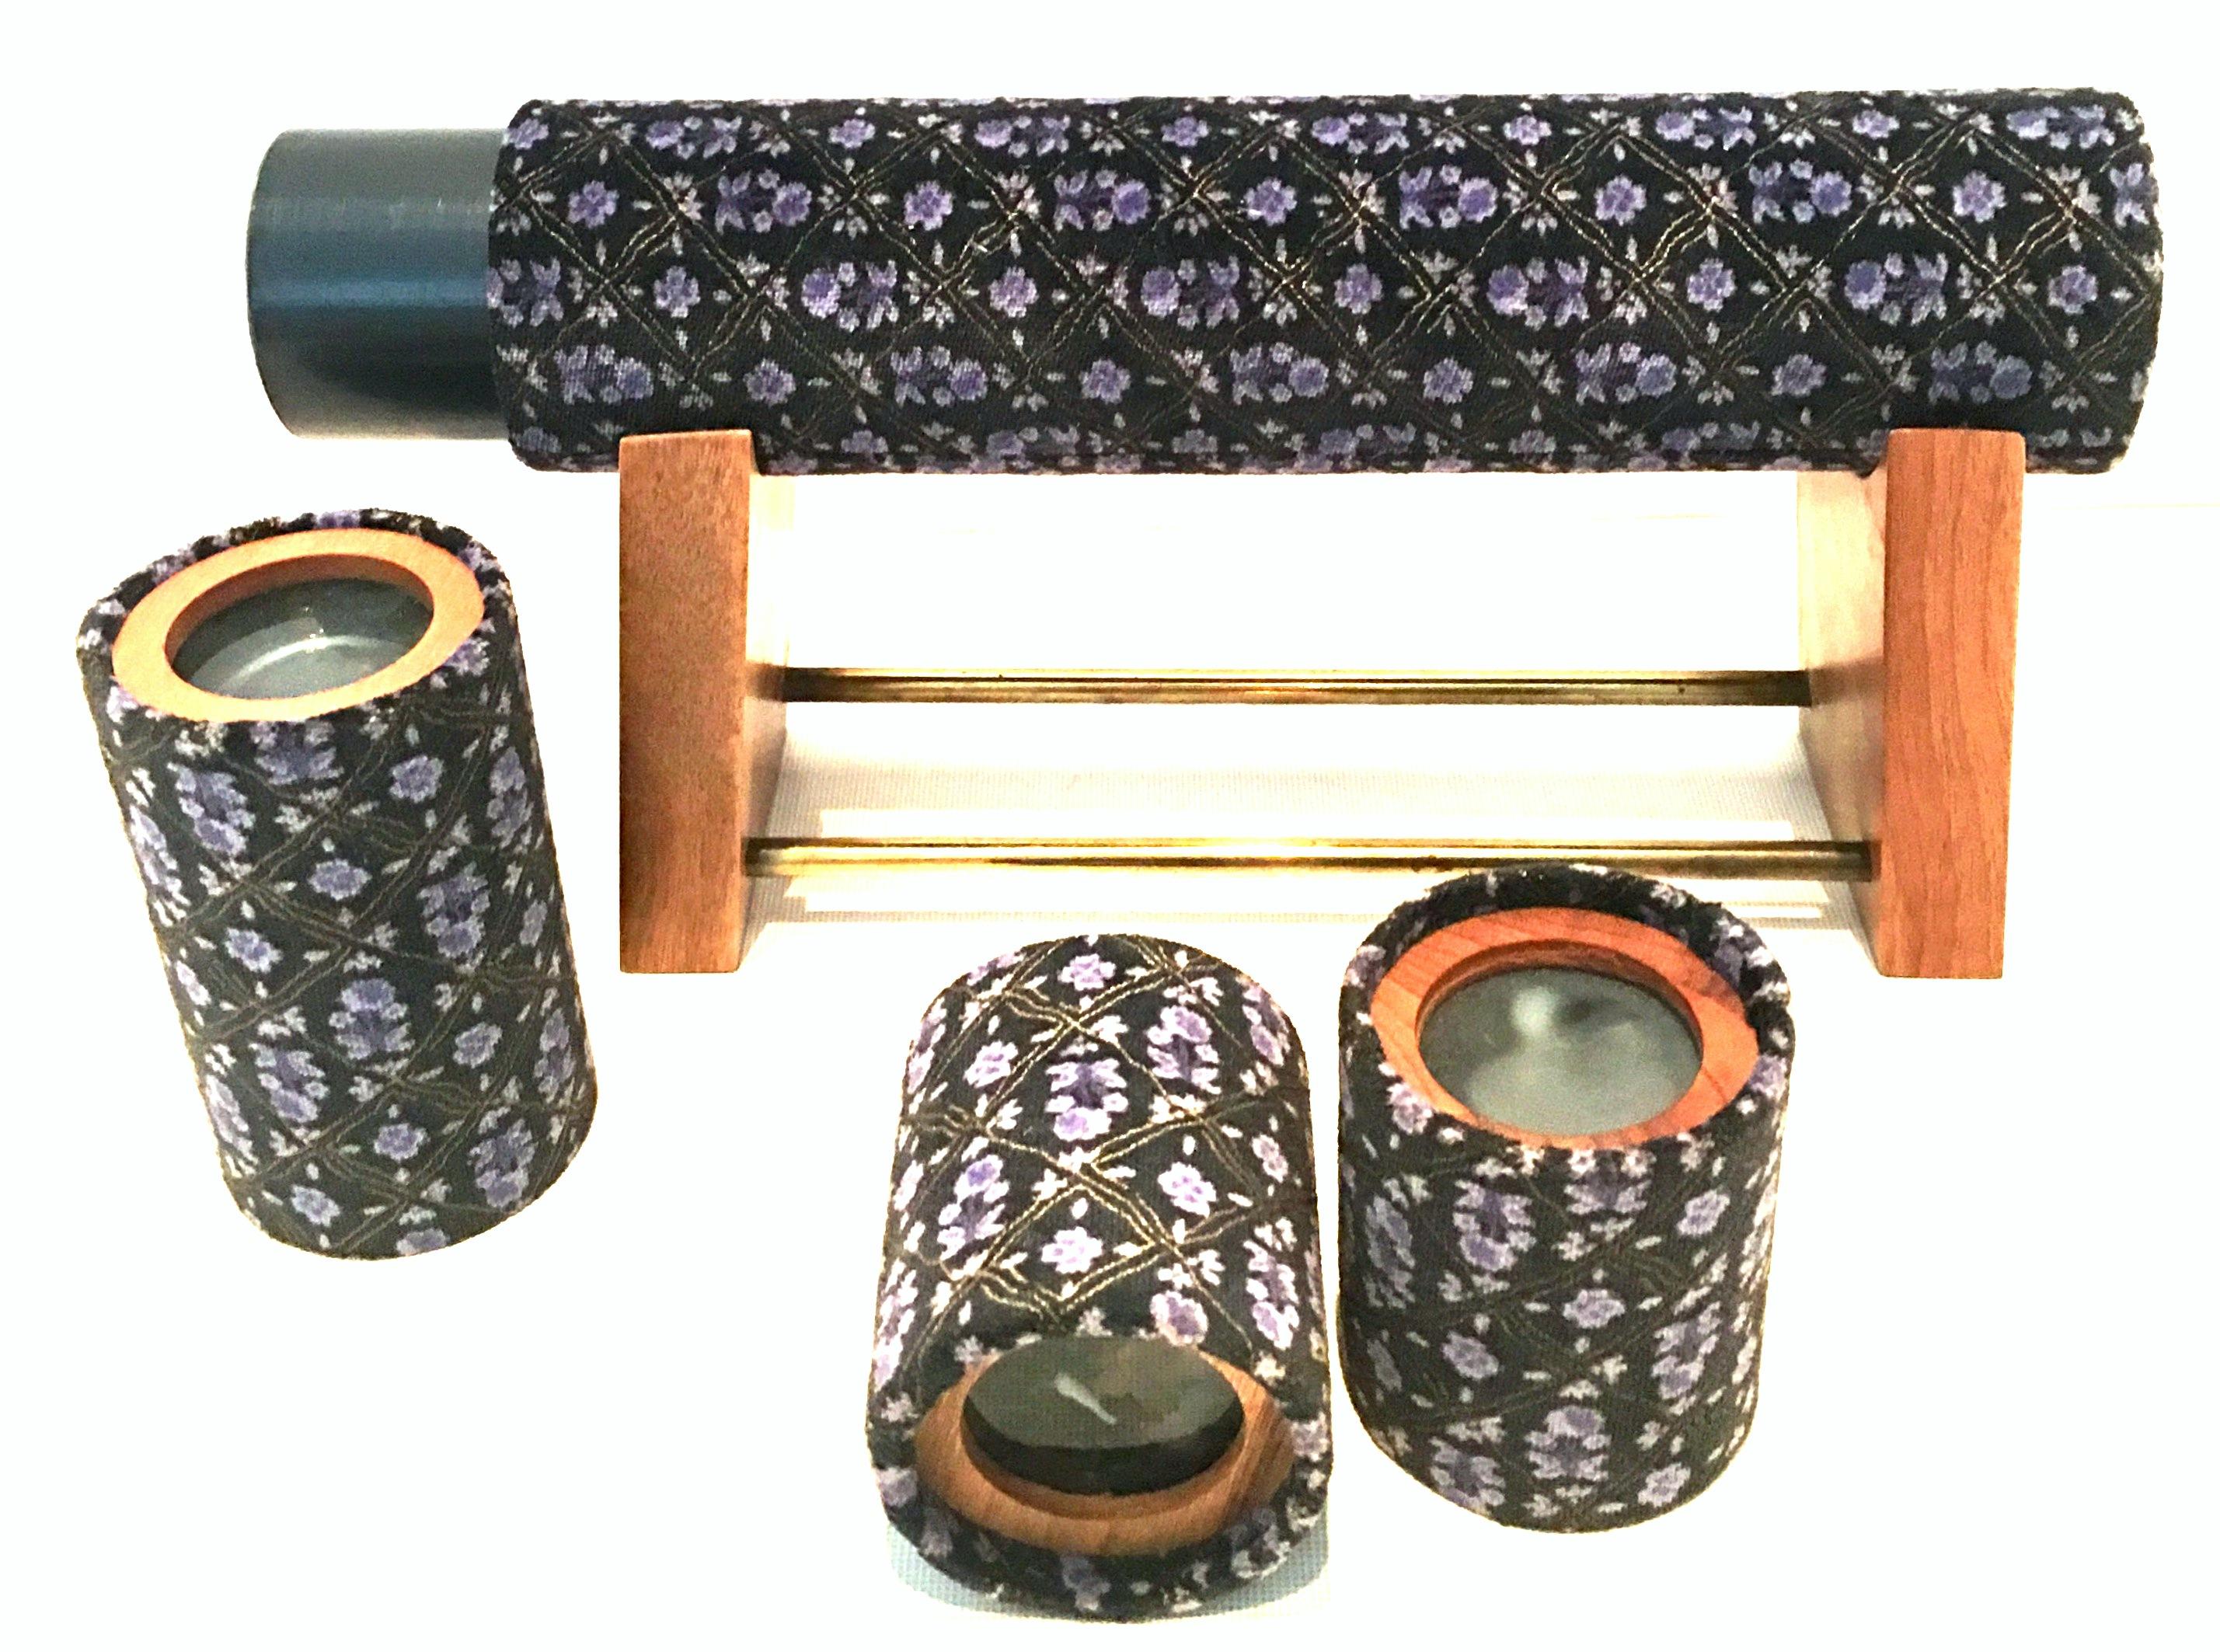 1970'S Wood & Velvet Hand Crafted Kaleidoscope Signed, C. Huber. This five piece set includes a teak wood and brass stand, kaleidoscope and three interchangeable viewers using natural elements of dried flowers and mini seashells. Main kaleidoscope